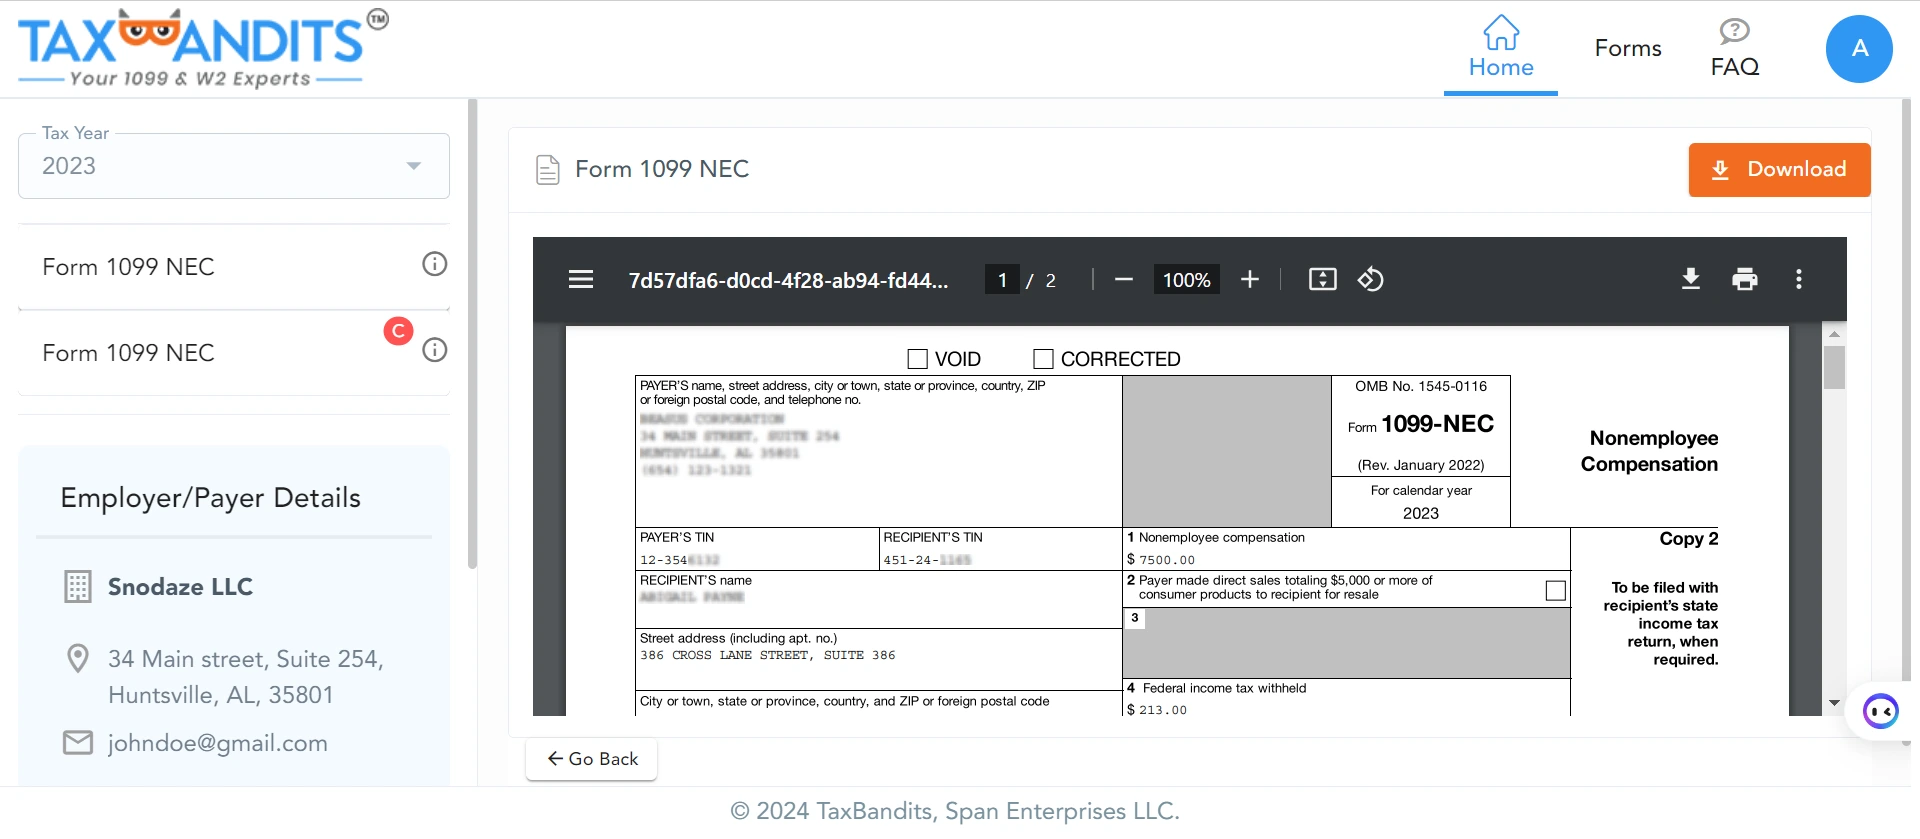 Transmit your Form W-2 to the SSA